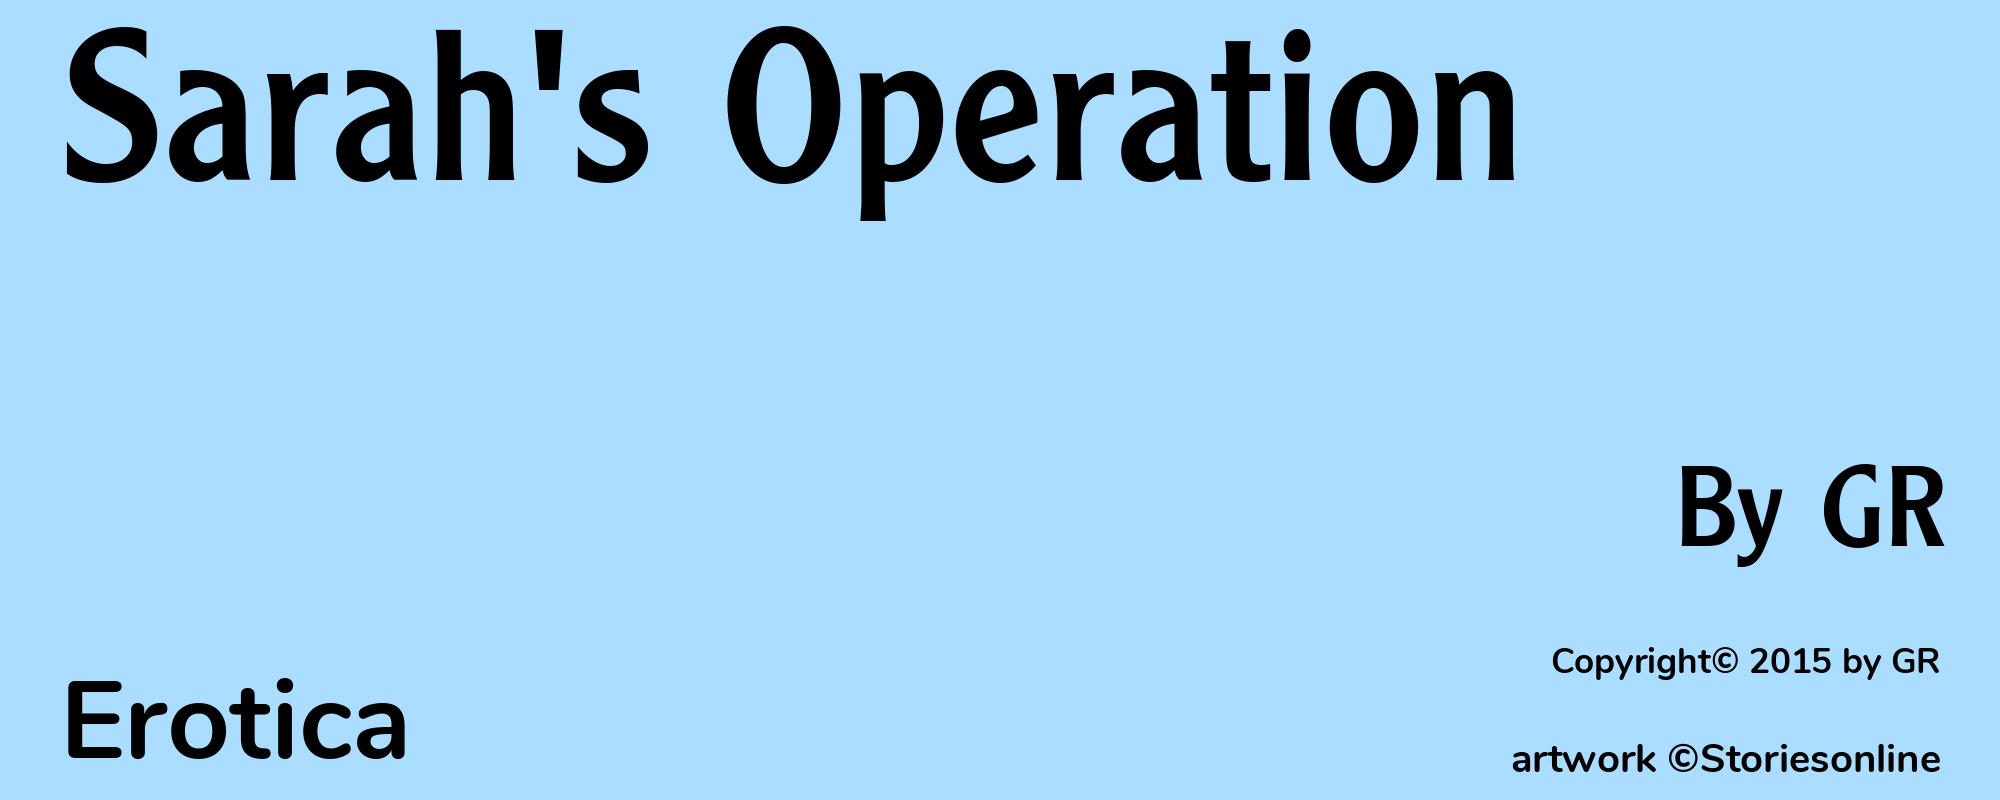 Sarah's Operation - Cover